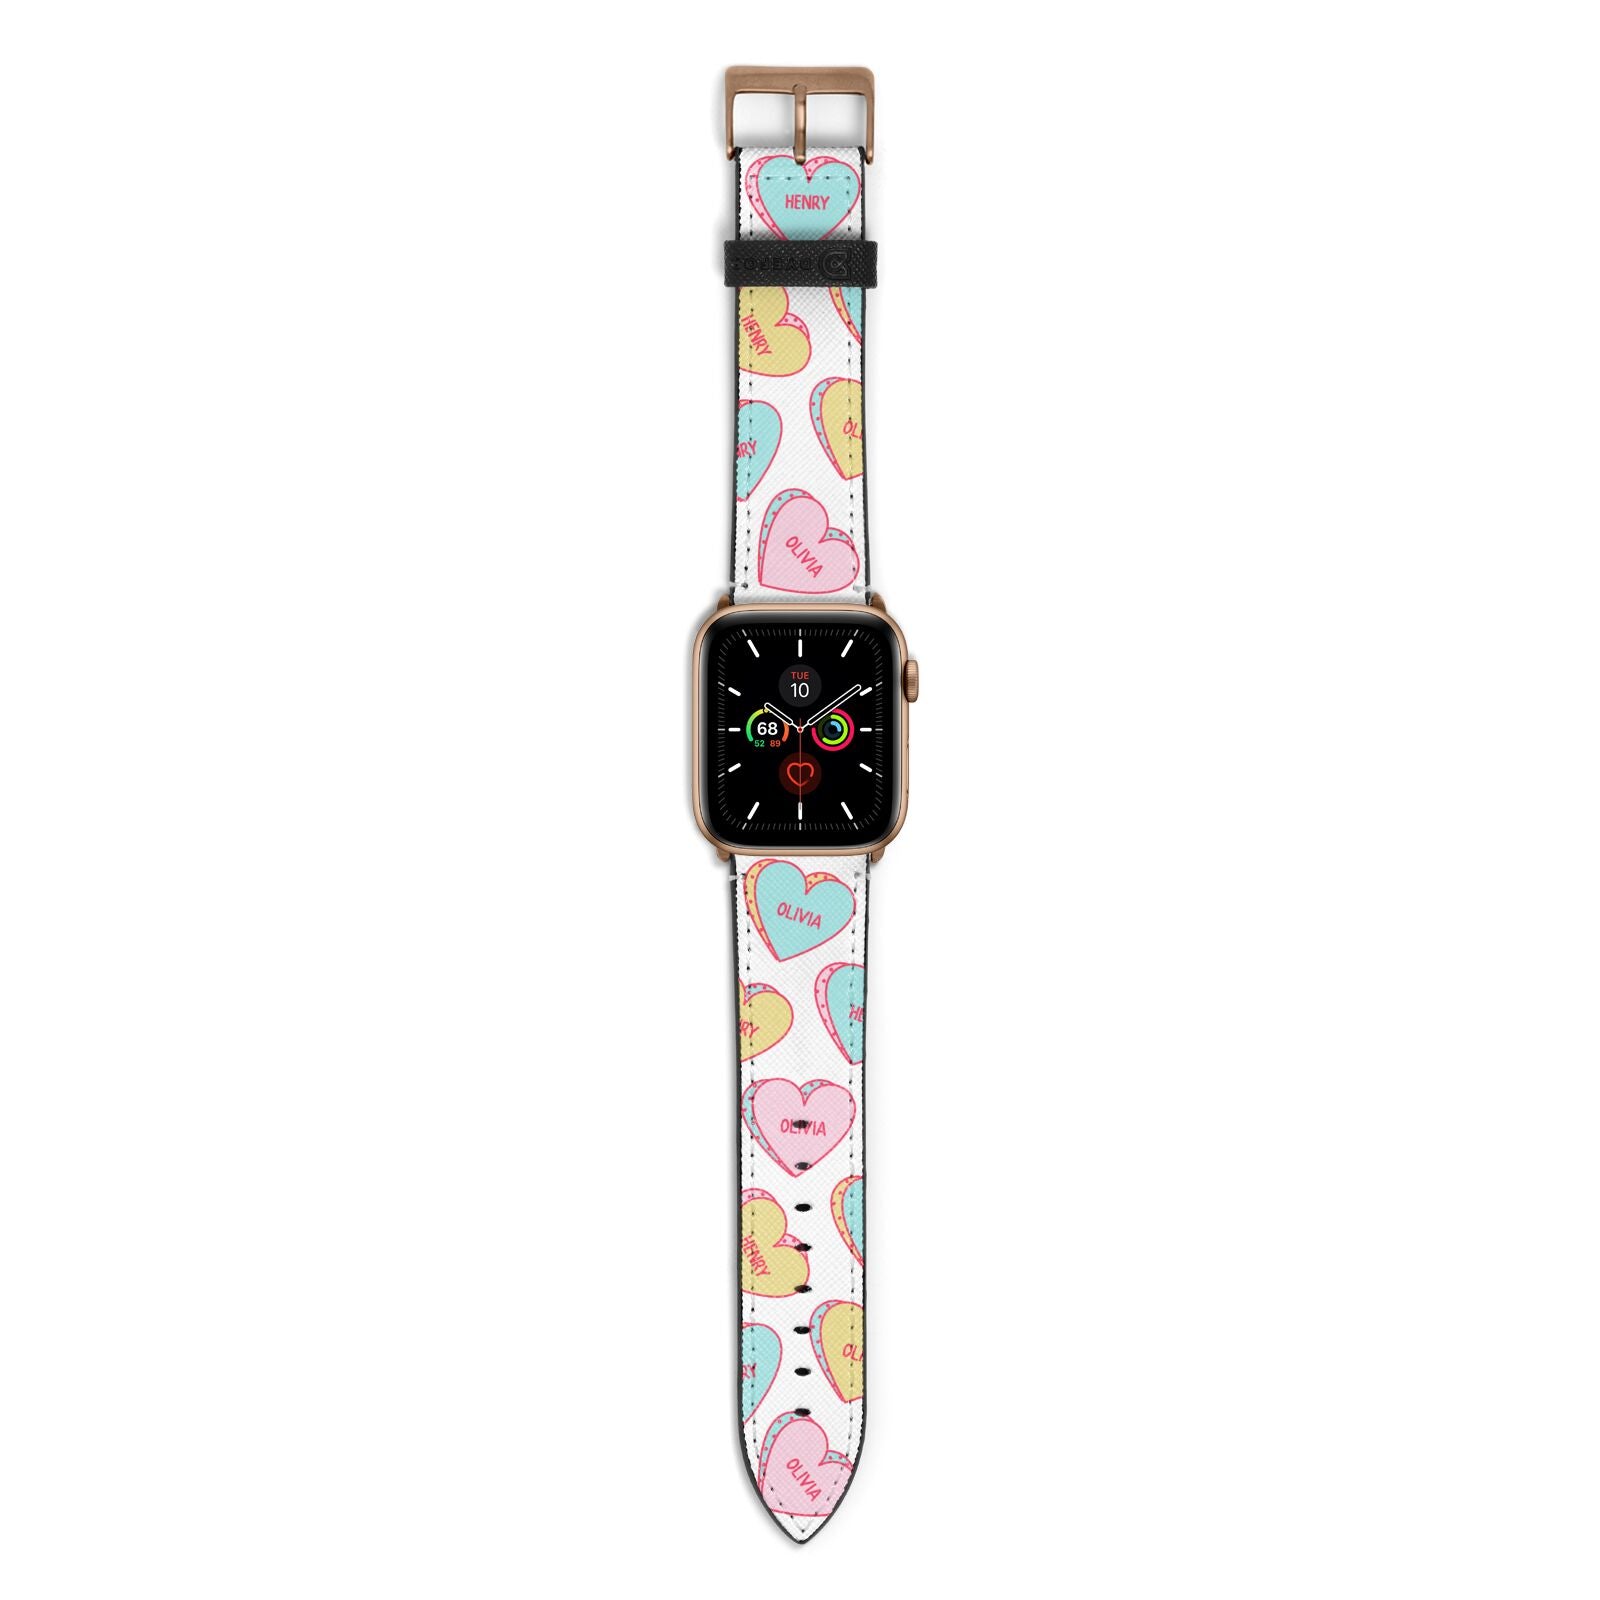 Personalised Heart Sweets Apple Watch Strap with Gold Hardware